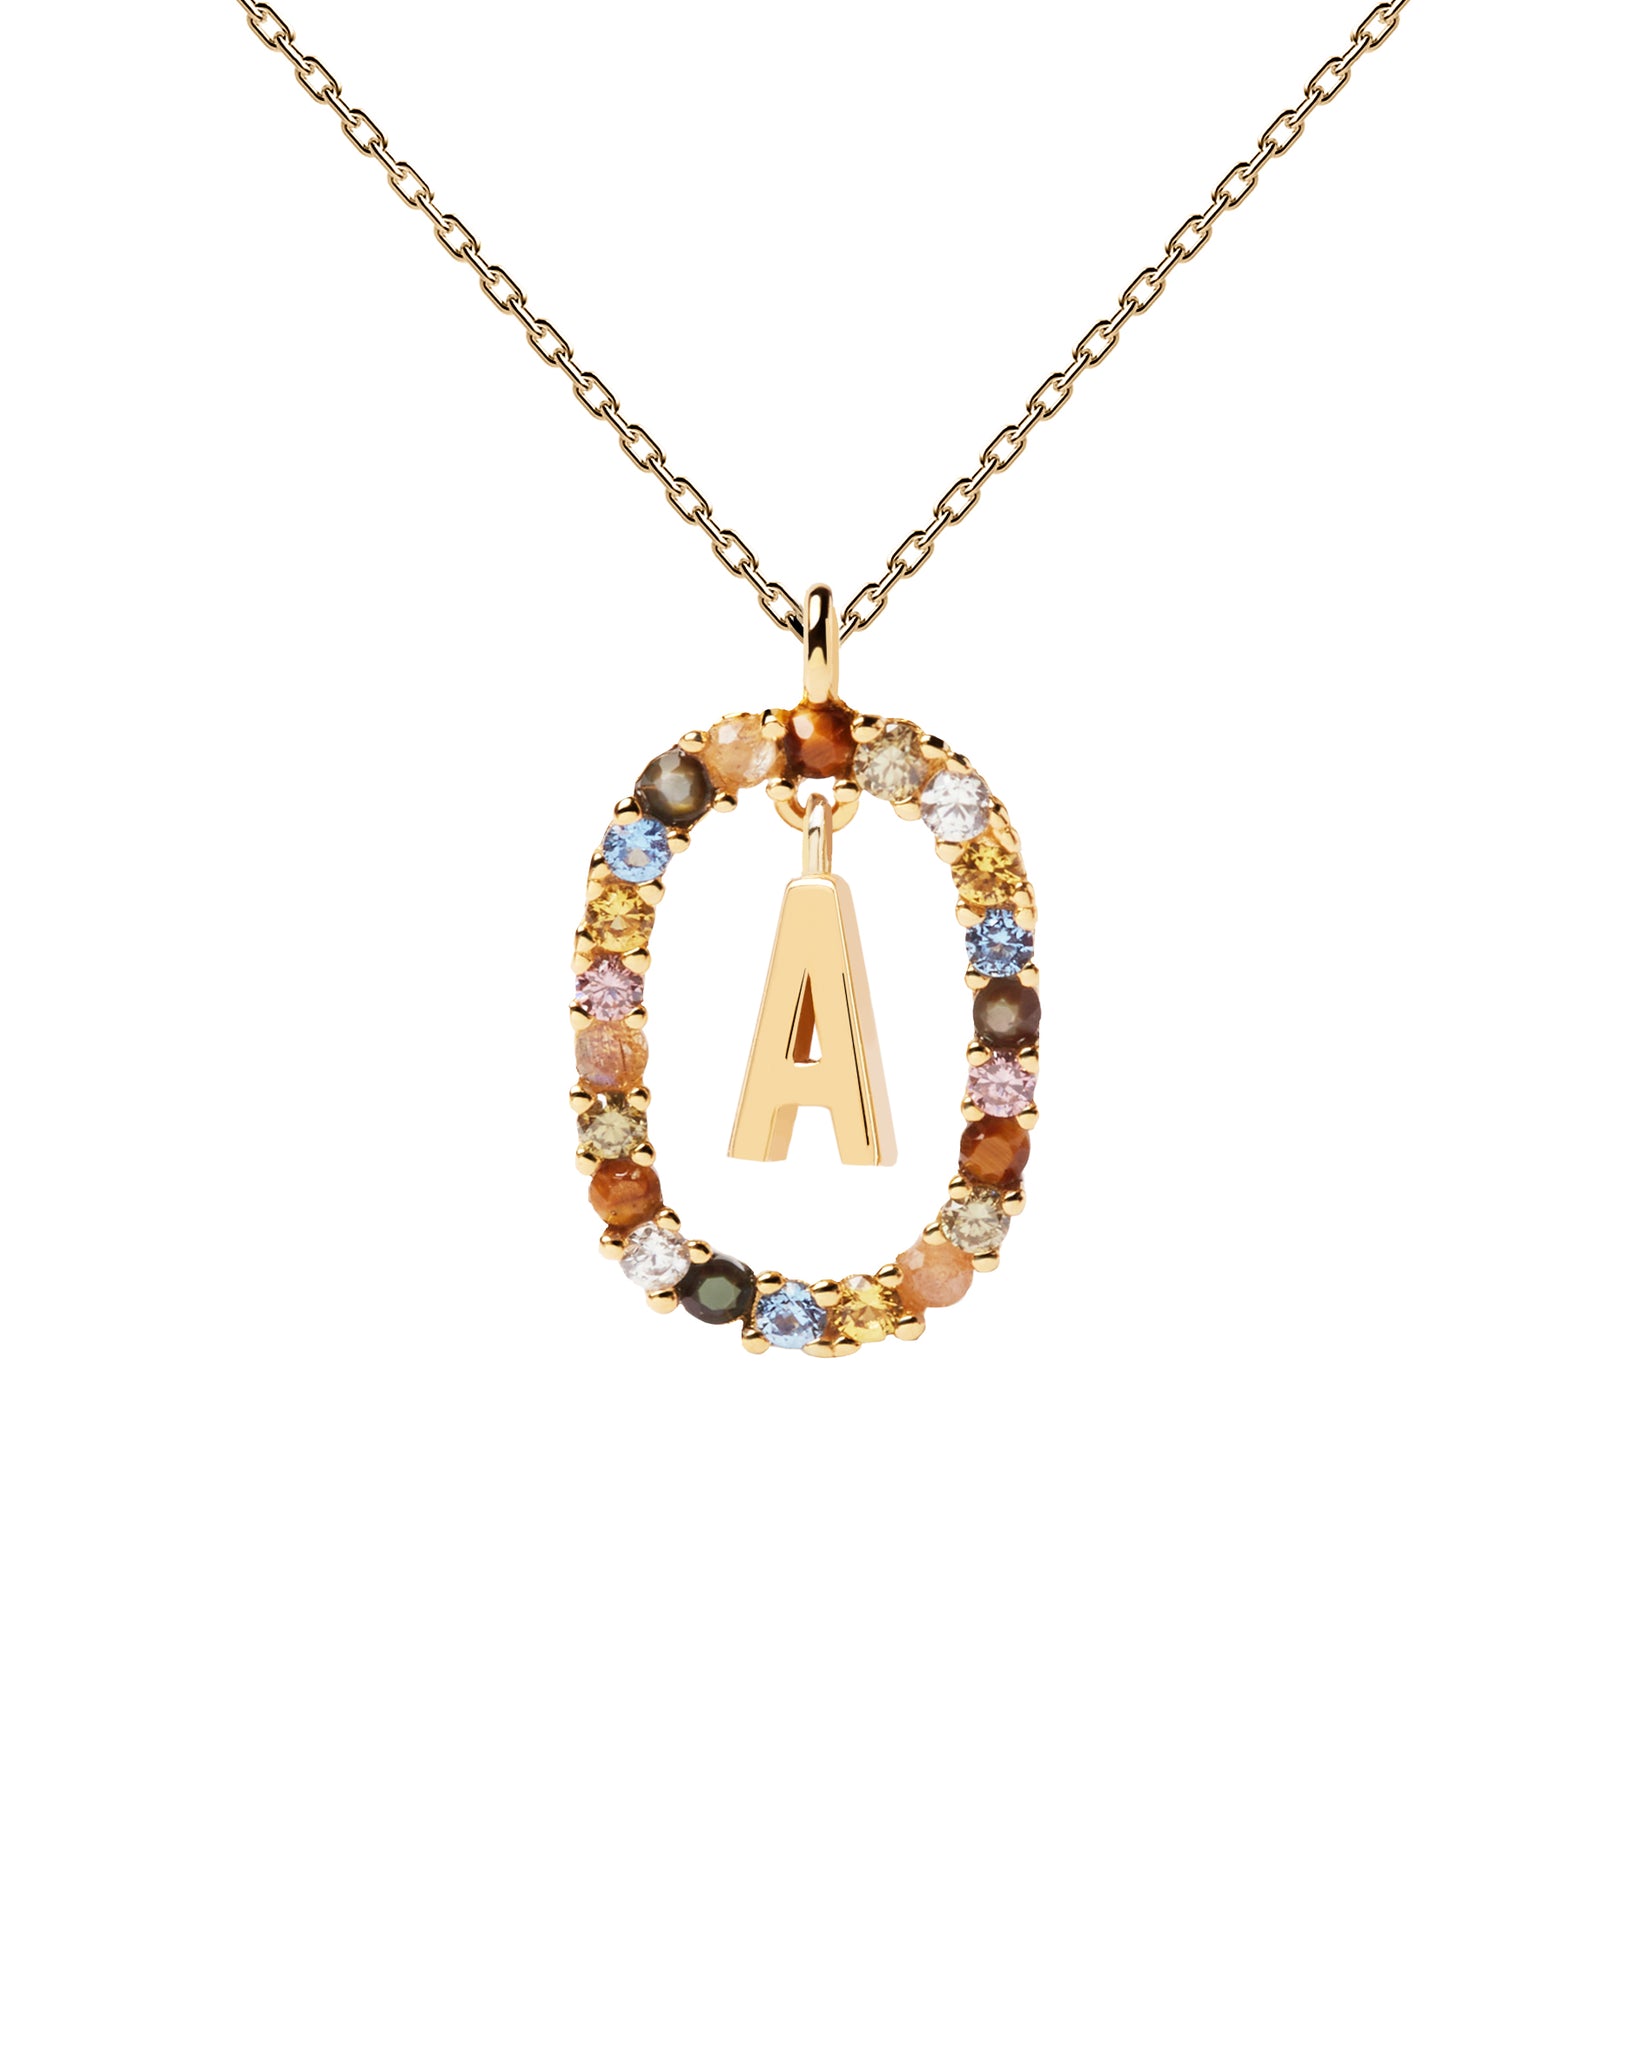 PDPAOLA Letter A Necklace - 925 Sterling Silver / 18K Gold Plating with Gemstones